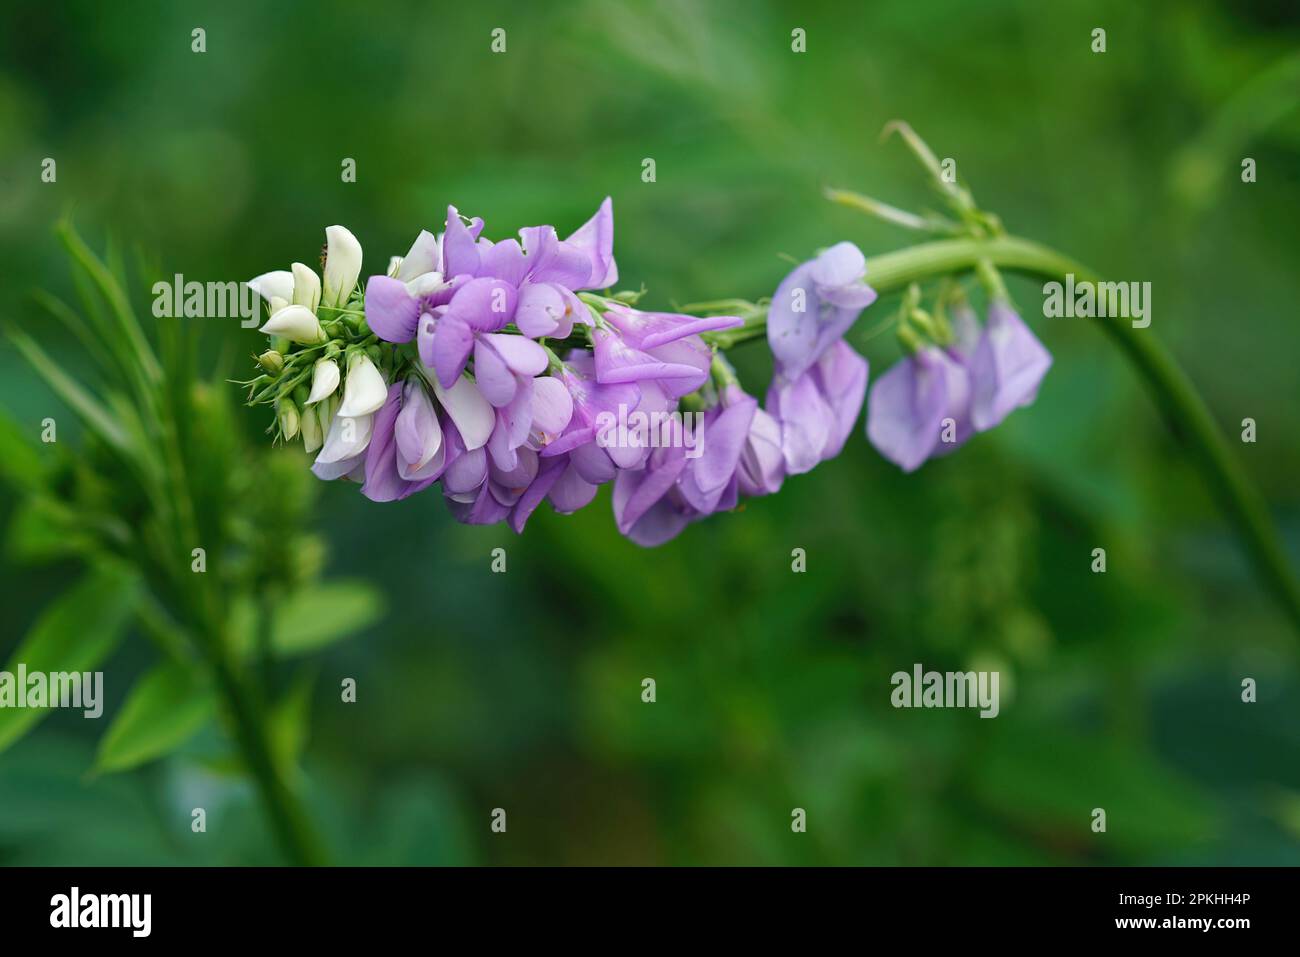 Vertical closeup on the emerging purple flowers of Goat's rue or Italian fitch, Galega officinalis, a pharmaceutical plant Stock Photo